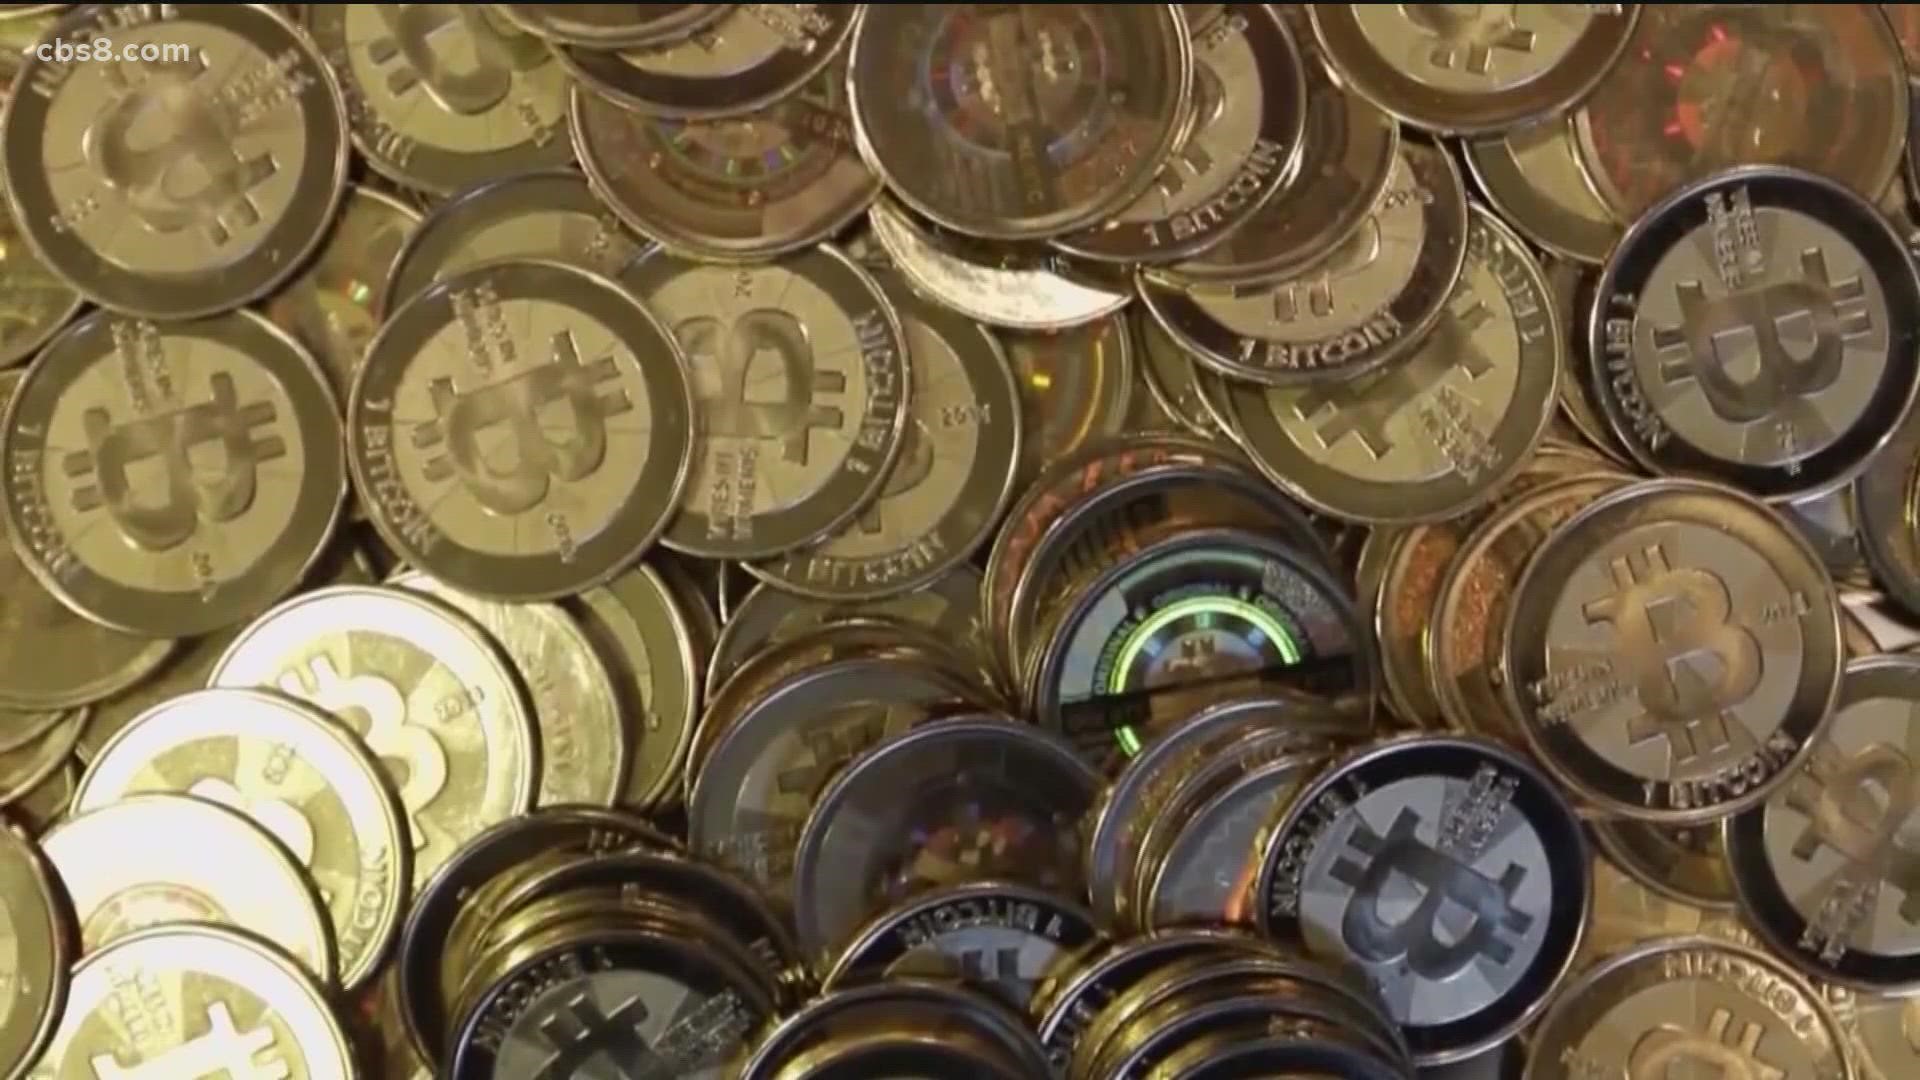 Prosecutors say the investment scheme defrauded investors out of more than $2 billion. It is believed to be the largest cryptocurrency fraud ever criminally charged.